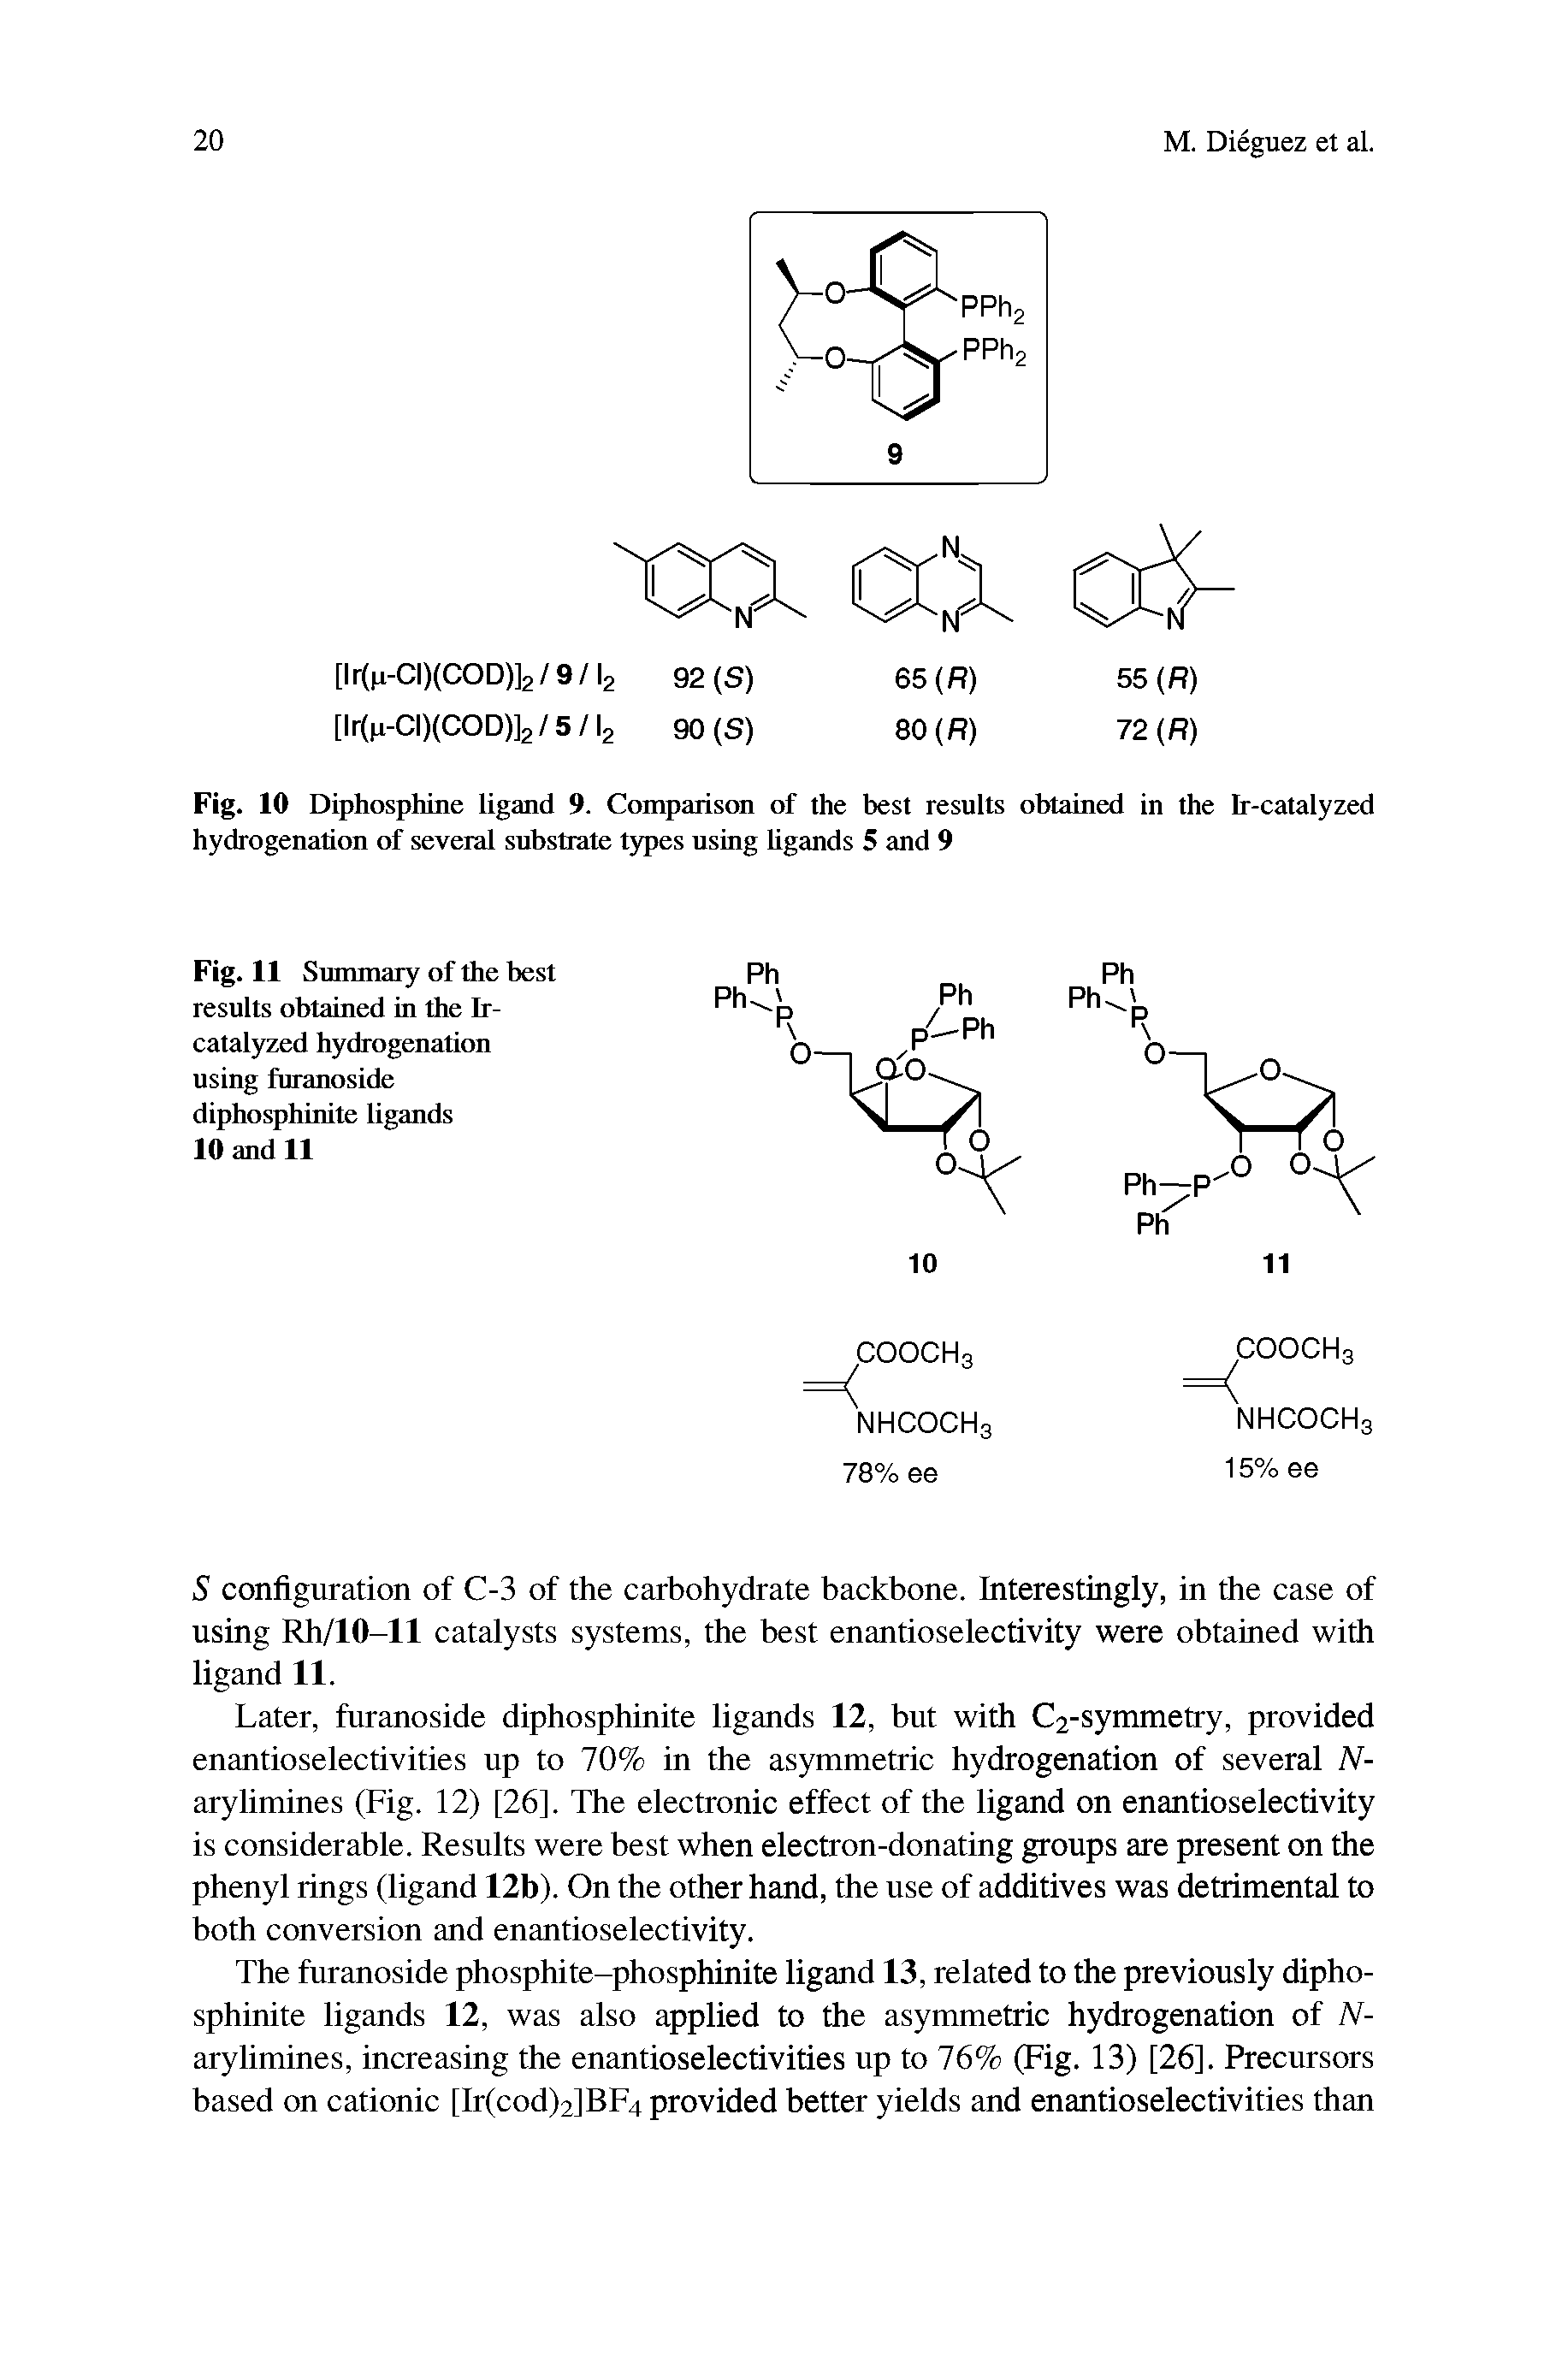 Fig. 10 Diphosphine ligand 9. Comparison of the best results obtained in the b-catalyzed hydrogenation of several substrate types using hgands 5 and 9...